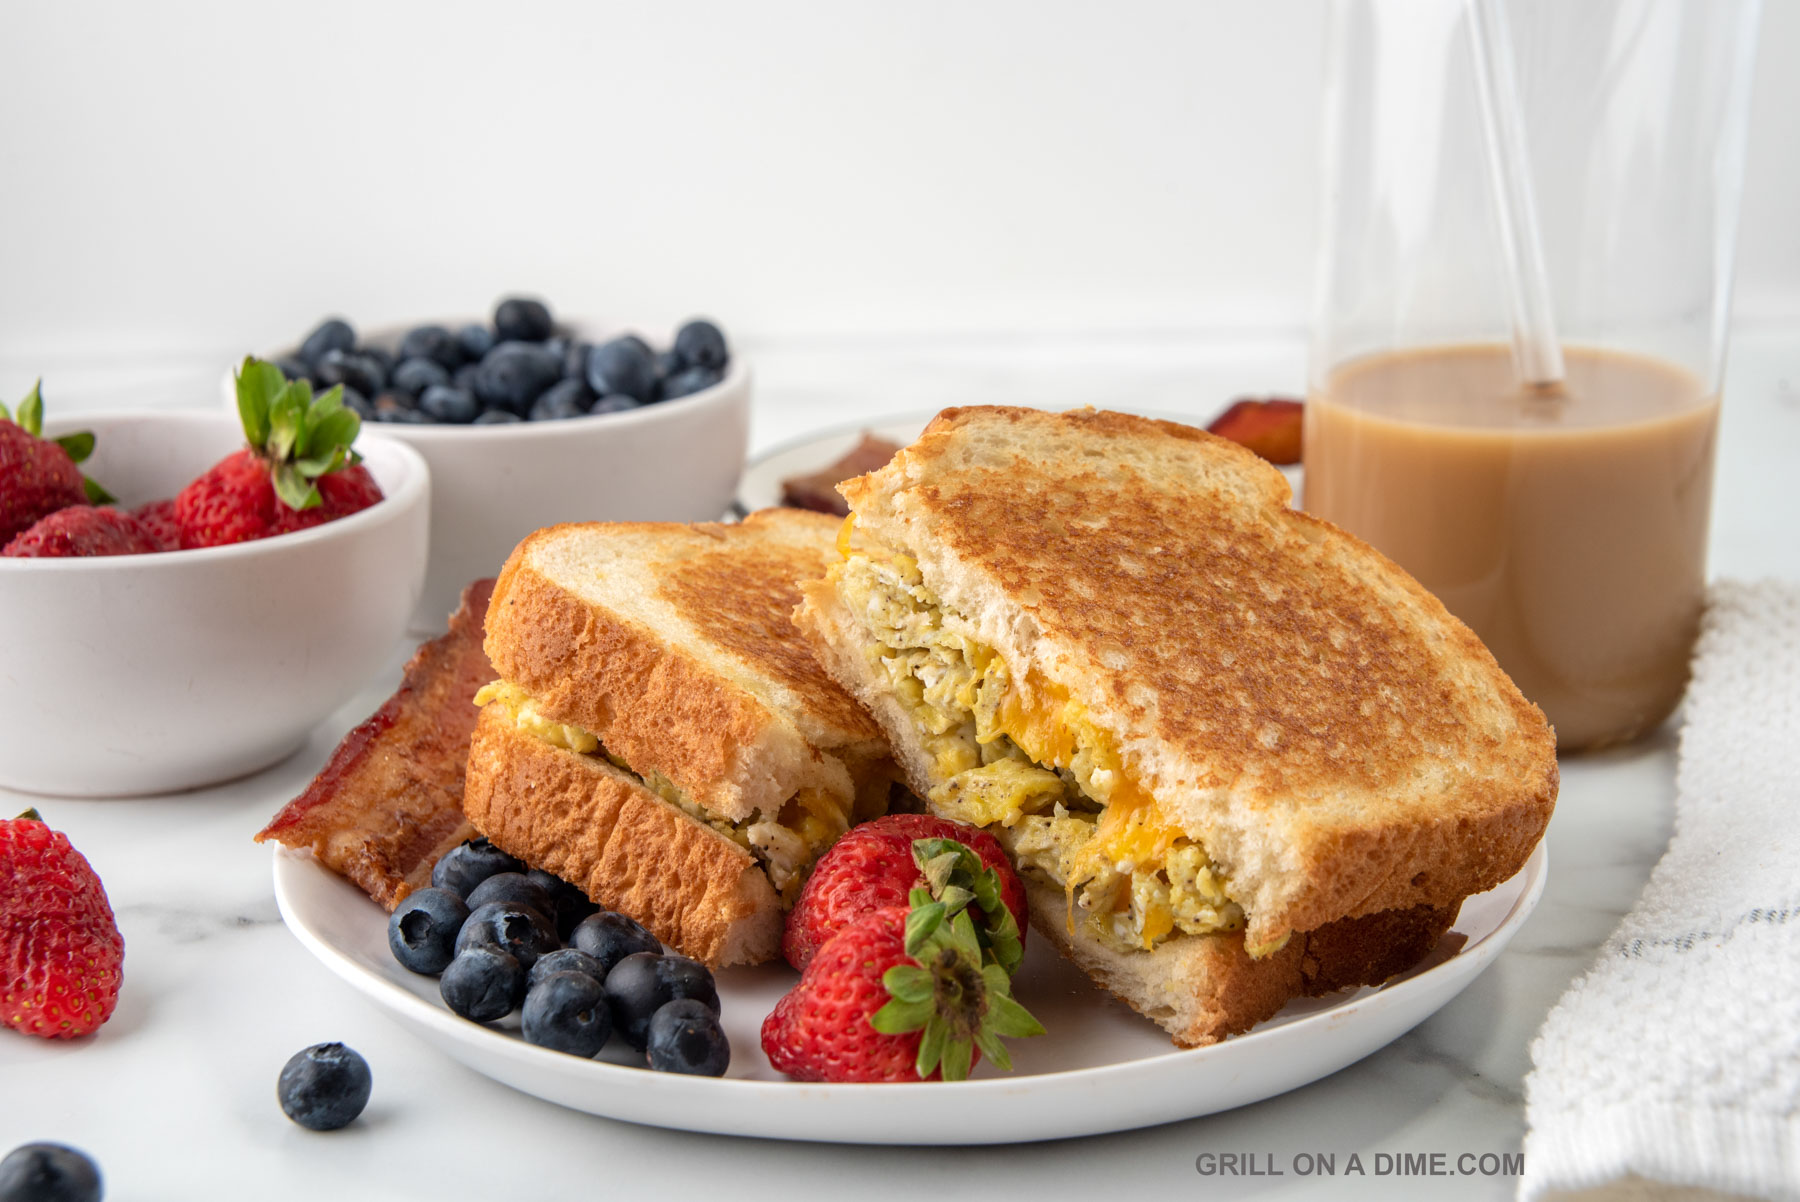 Scrambled Egg Sandwich on a plate with a side of blueberries and strawberries